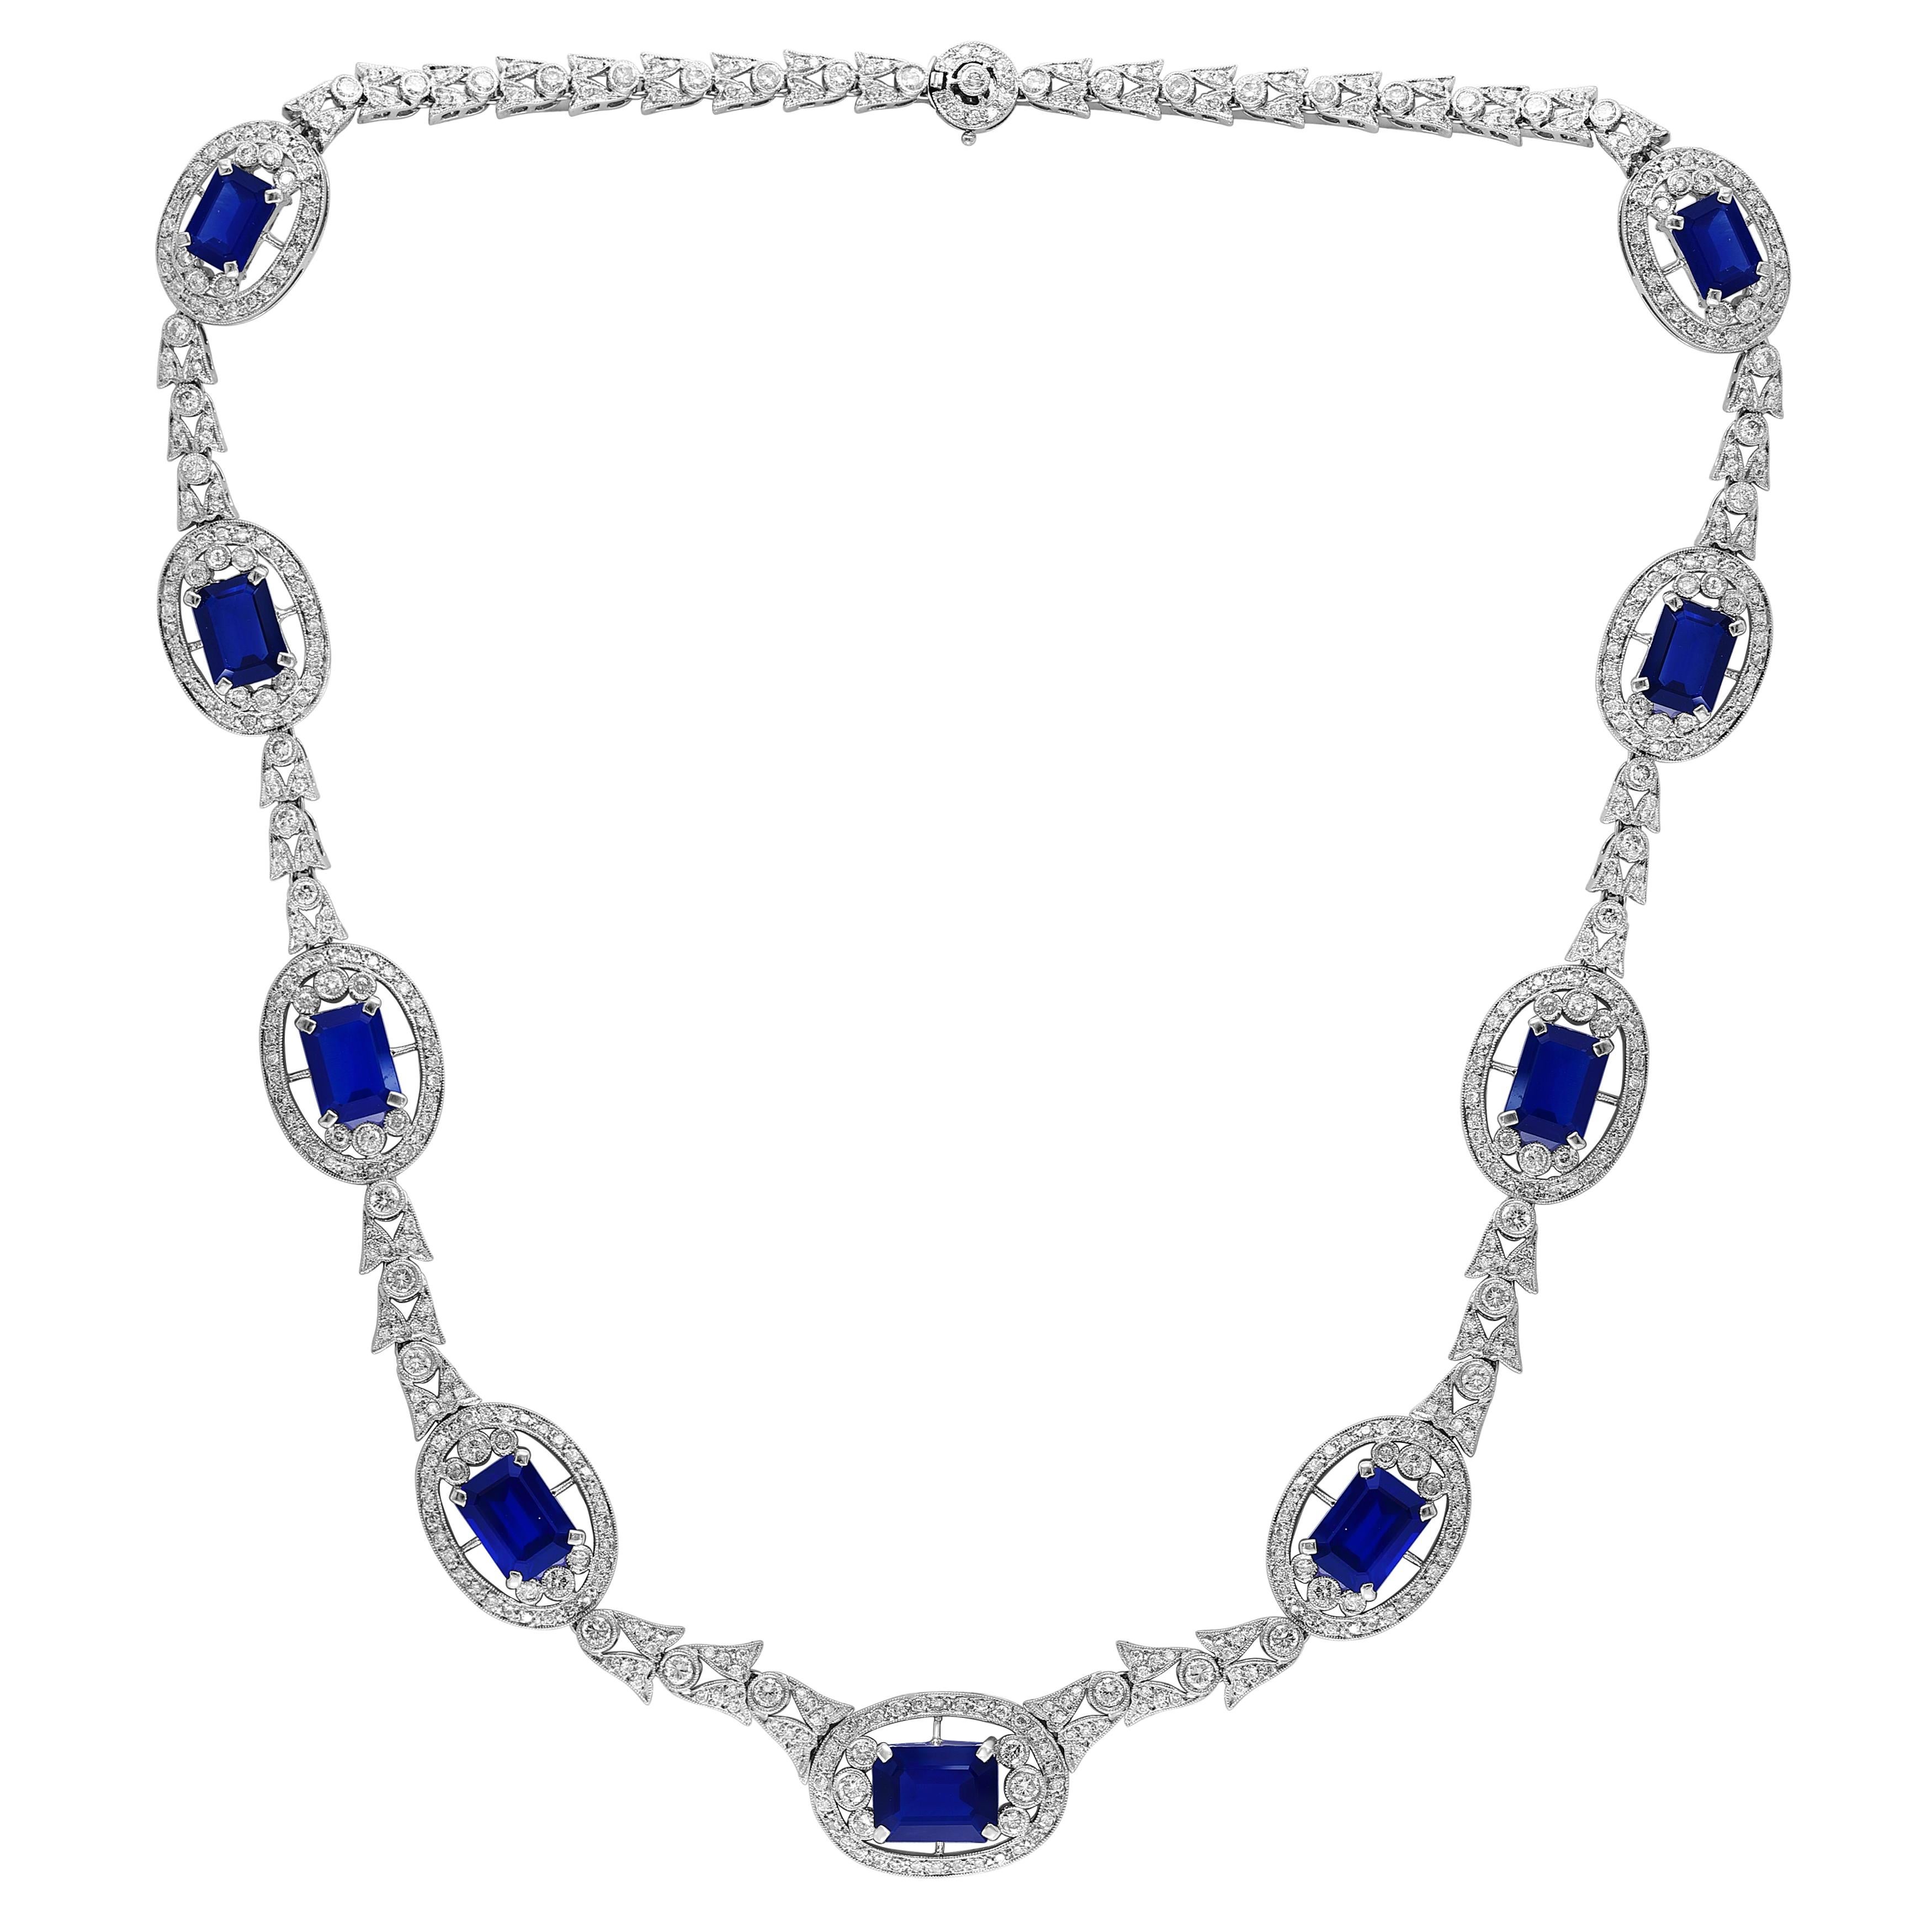 
GIA Certified Natural Blue Sapphire & Diamond Necklace 18 Kt White Gold, Estate
GIA report # 2225370708
natural Sapphire
Origin Thailand 
This Necklace made out of 18 Karat gold .
Necklace consisting of  9 Emerald cut natural sapphire .
Total Ct wt